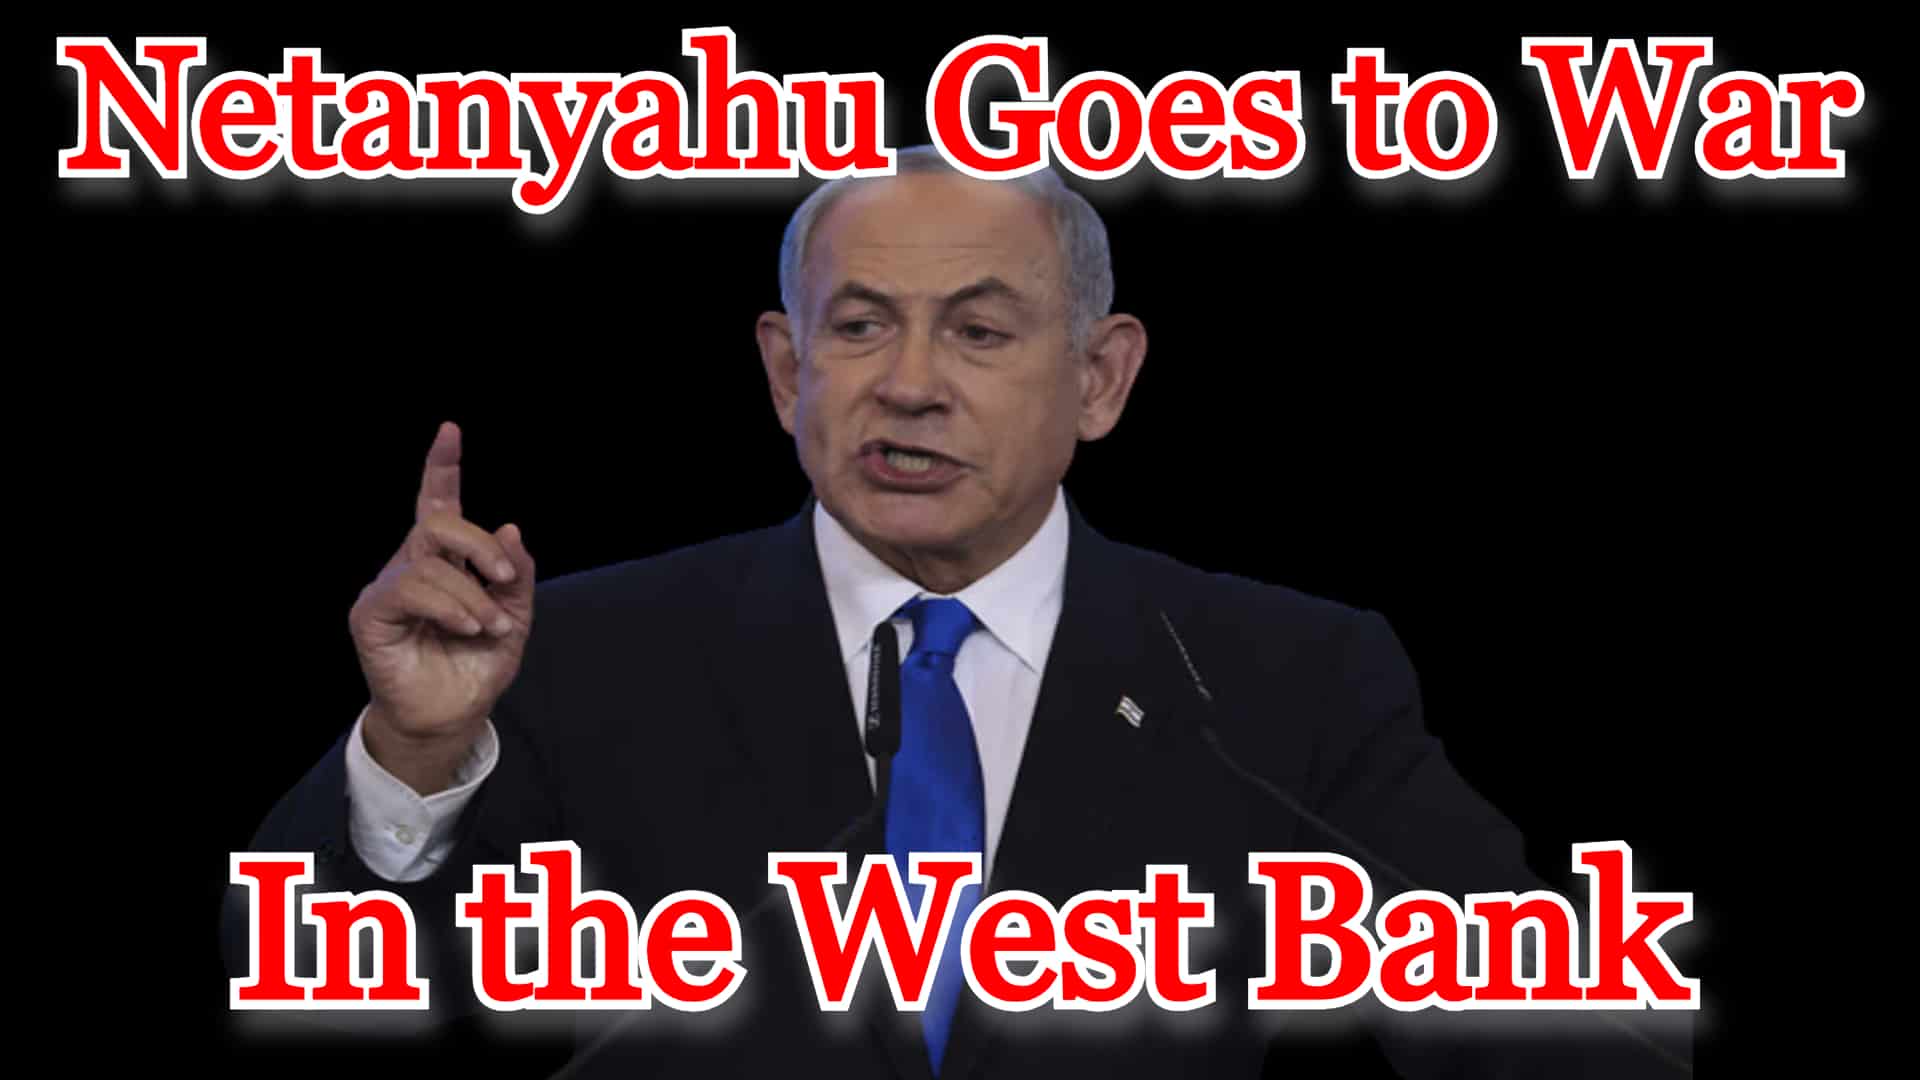 COI #445: Netanyahu Goes to War in the West Bank